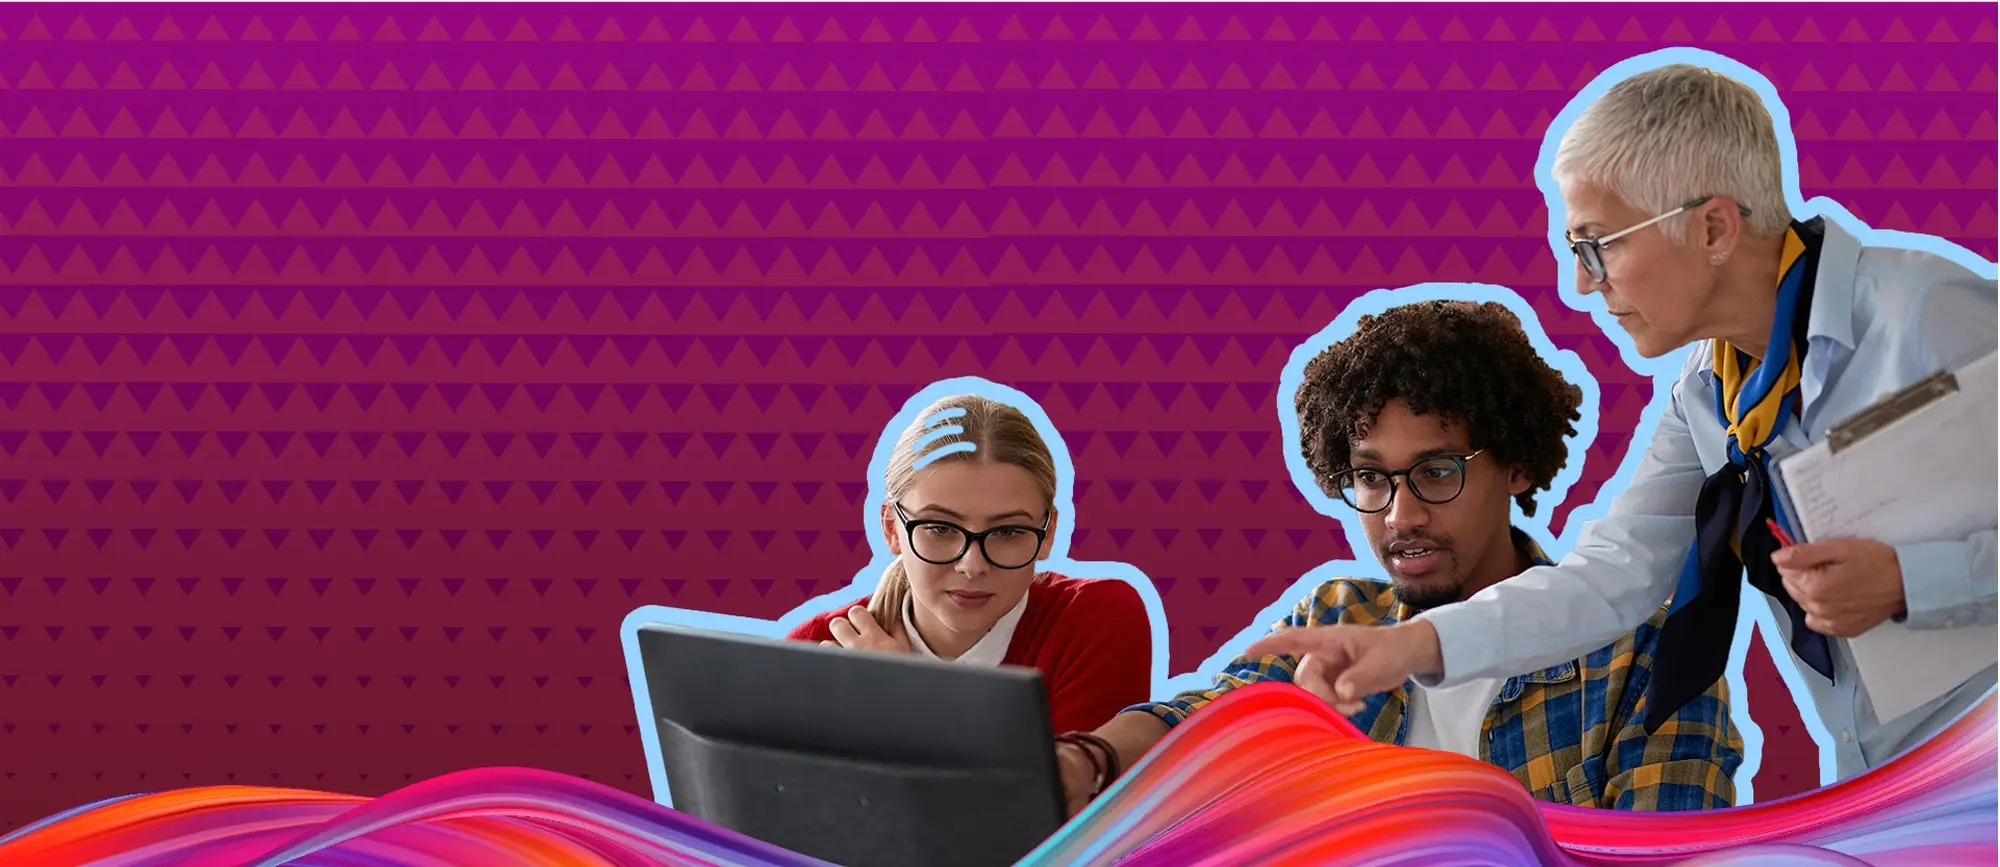 White female student with glasses, Black male student glasses and white female teacher with glasses all looking at a computer screen - they are center right of the photo with a pink and purple background.